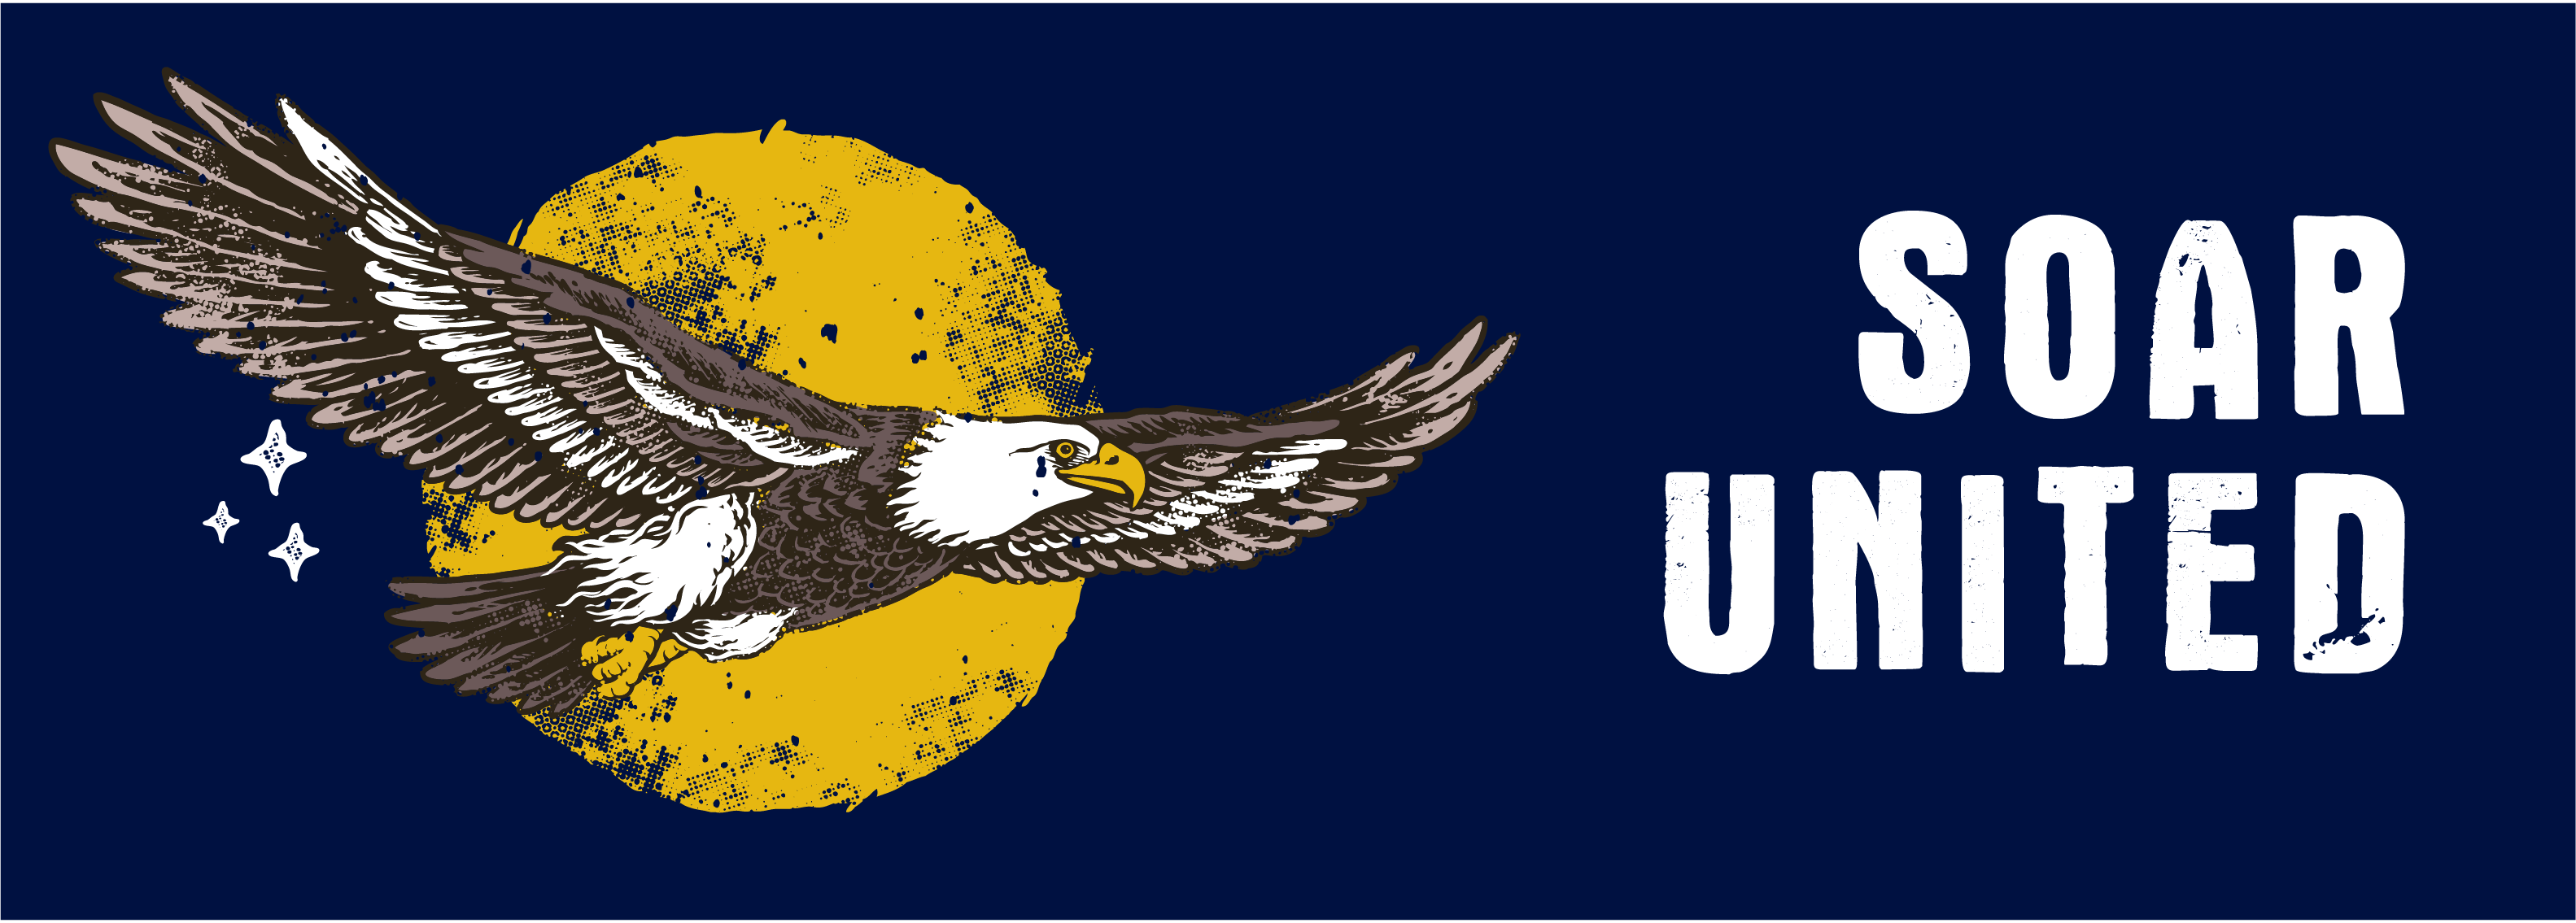 Soar United on a dark blue background with an eagle flying.